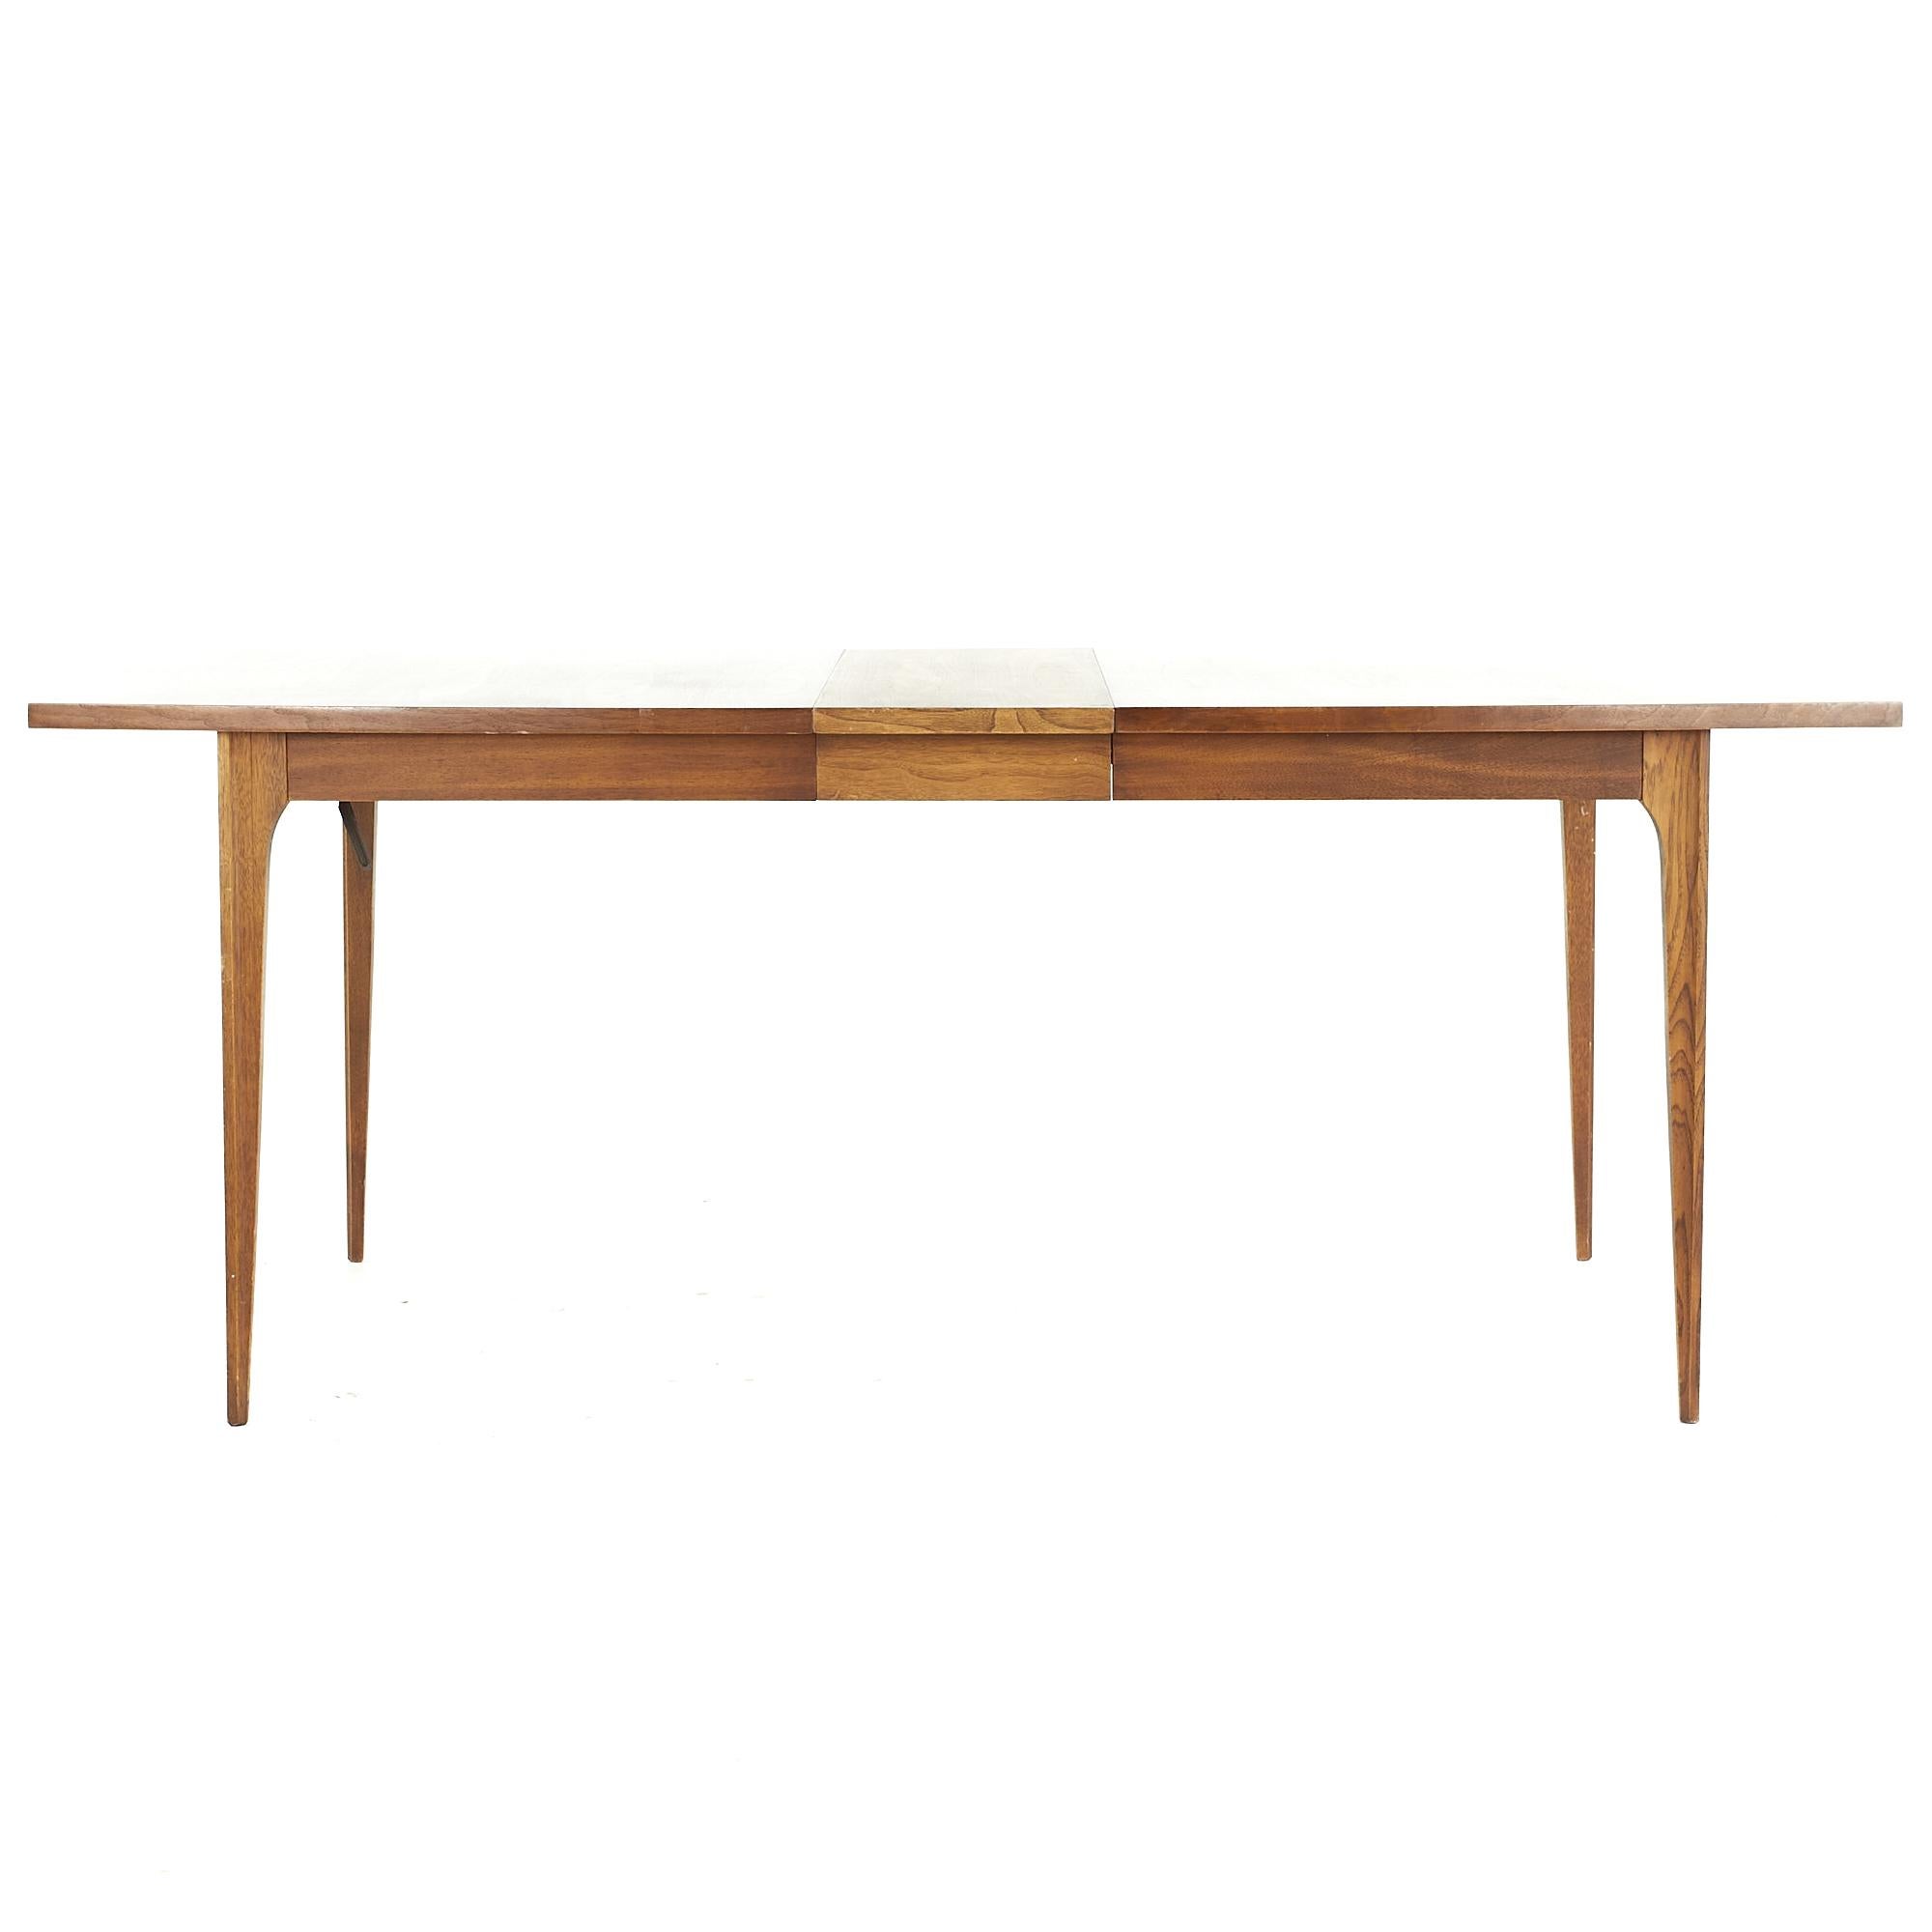 Broyhill Brasilia Midcentury Walnut Dining Table with 1 Leaf For Sale 2